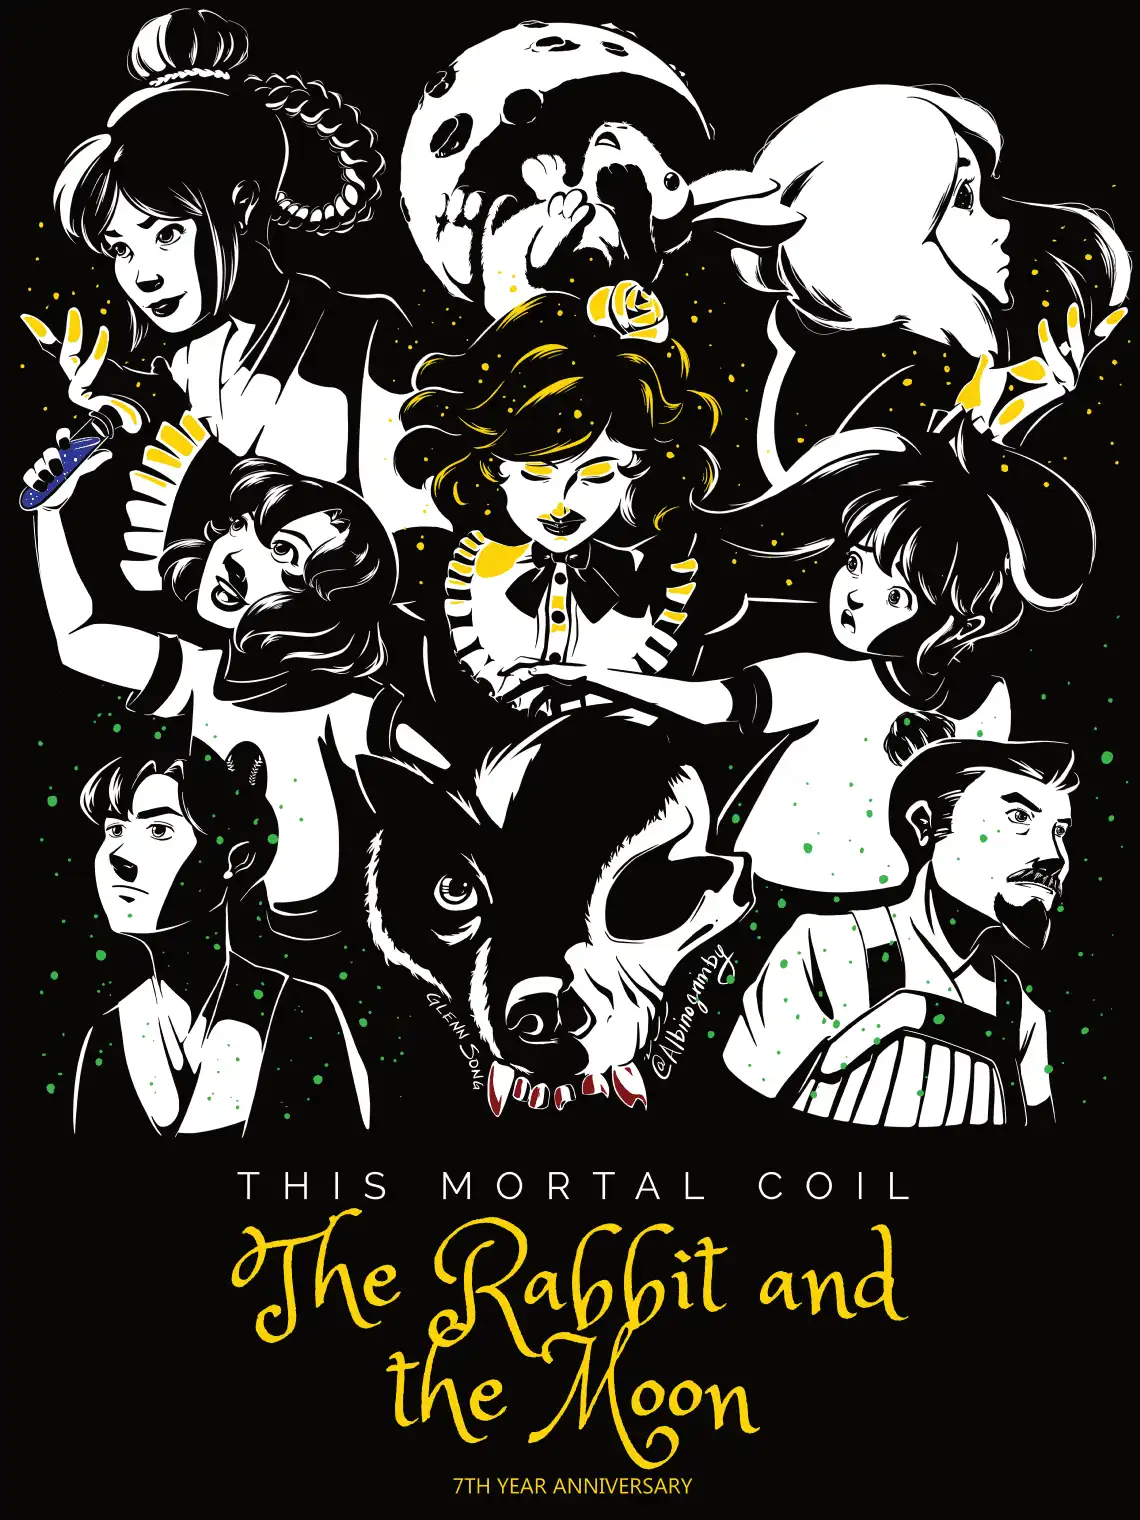 The Rabbit and the Moon 7th Anniversary!